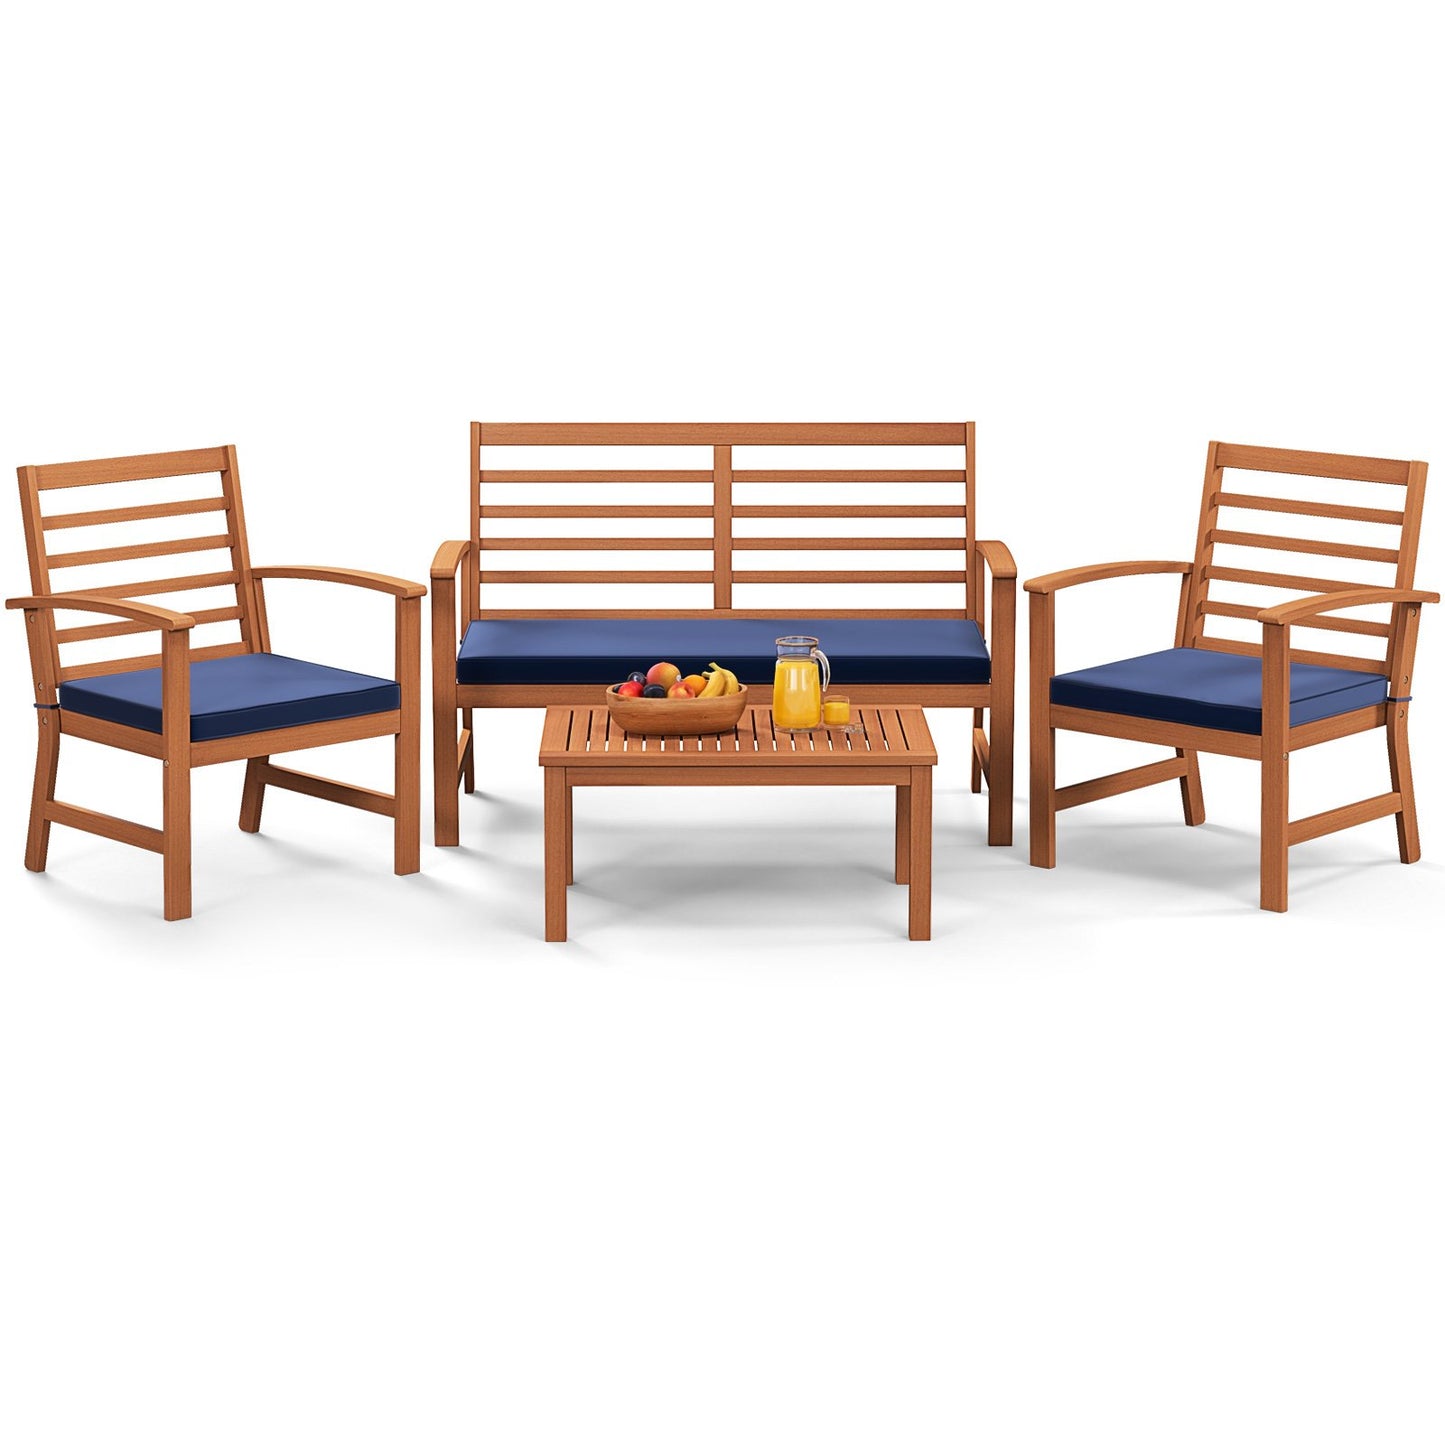 4 Pieces Outdoor Furniture Set with Stable Acacia Wood Frame, Navy